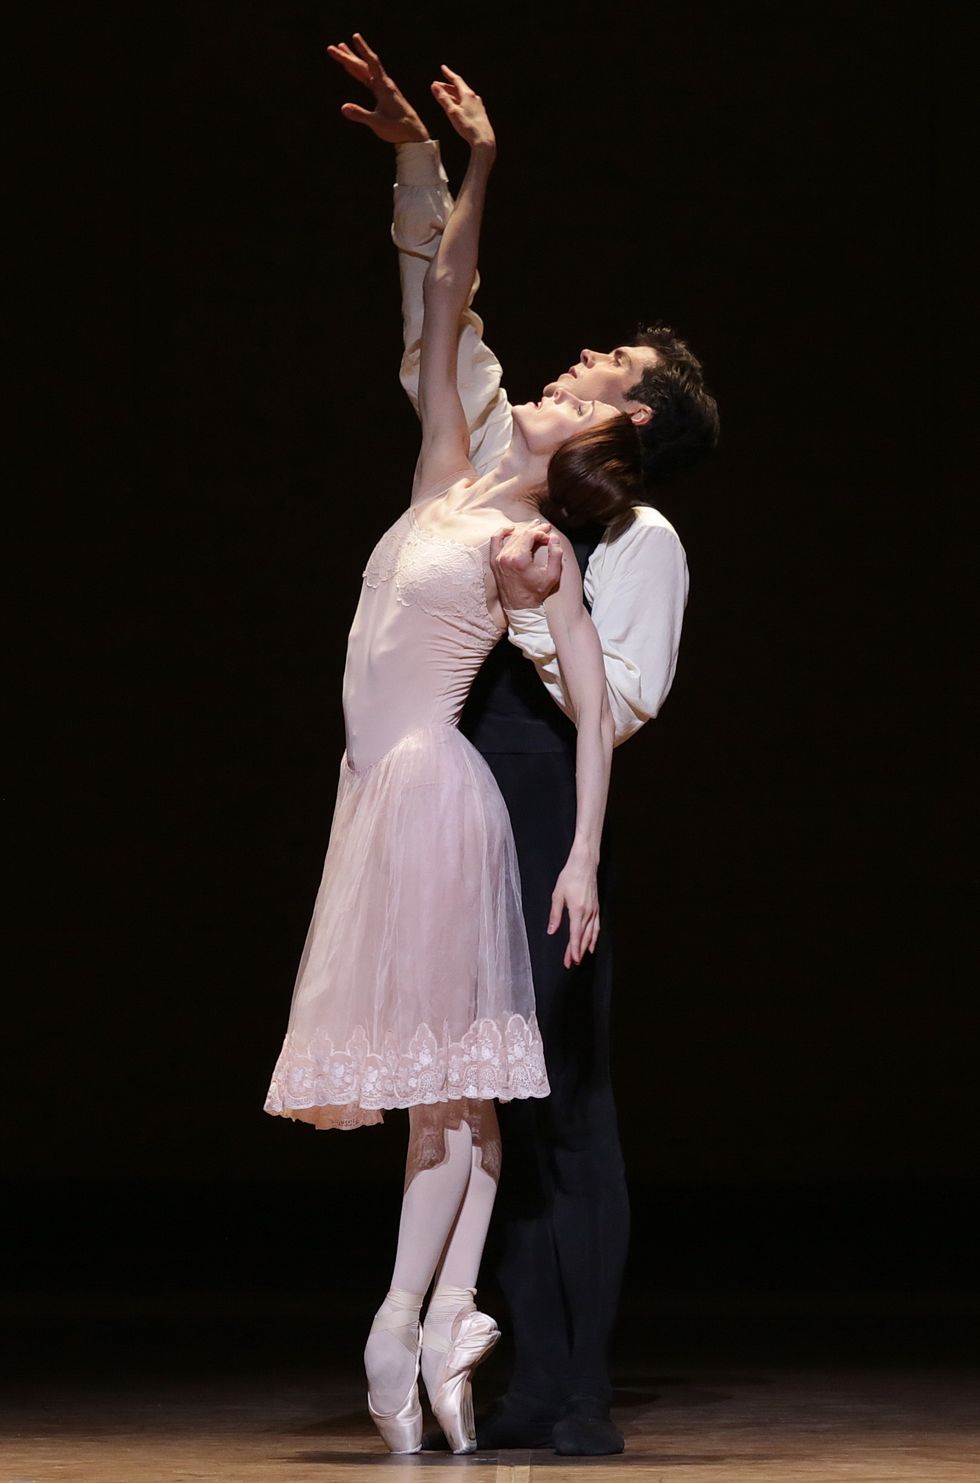 Zakharova balances in sous-sus en pointe, arching back as she reaches her right arm up, as Bolle stands behind her, supporting her under one arm while mirroring her reach with the other.